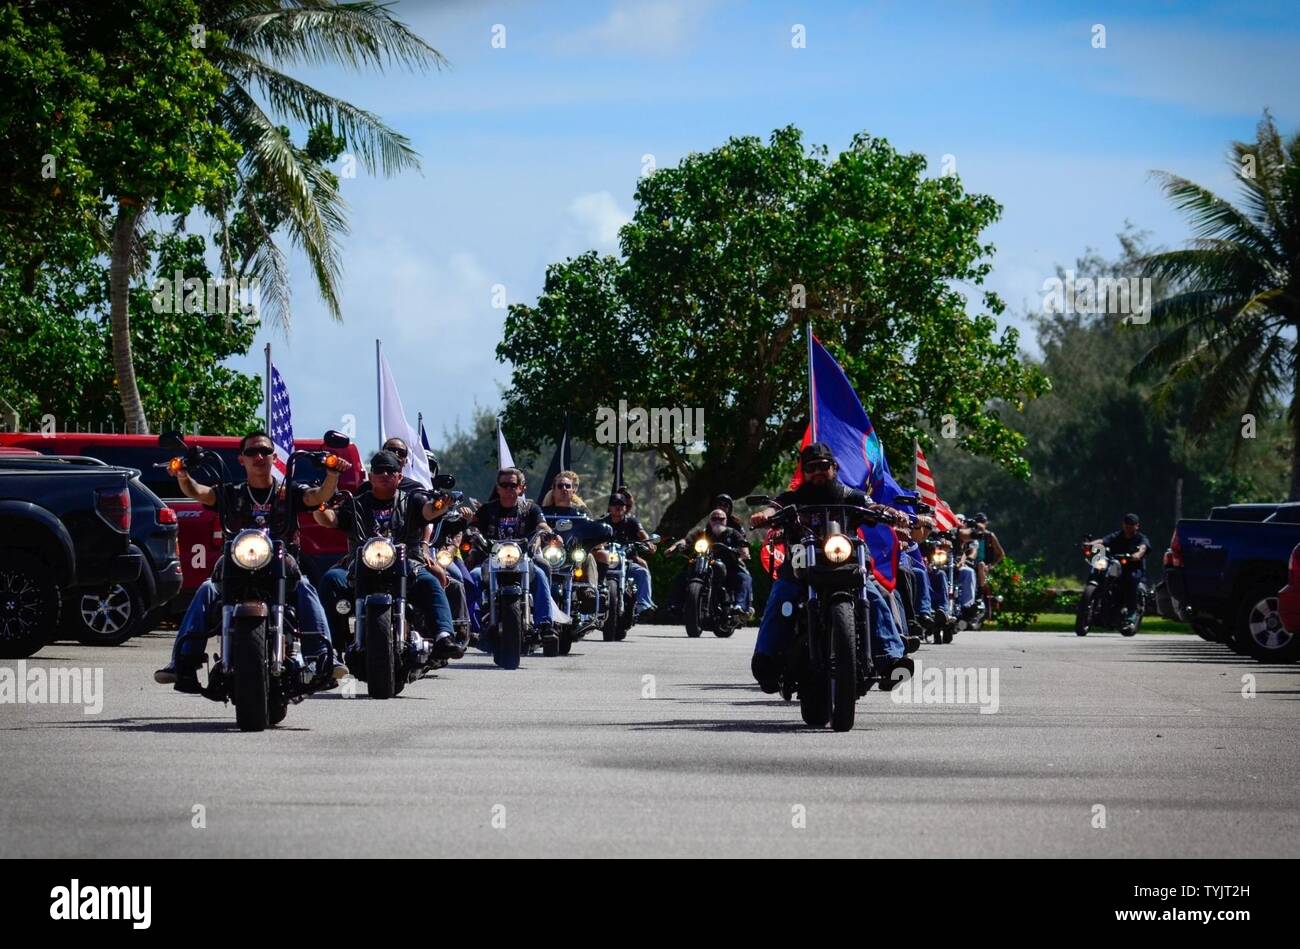 Motorcyclists ride in a memorial ride for fallen warriors, Nov. 11, 2016, at the Governor's Complex in Adelup, Guam. On Veterans Day, Americans nationwide pay tribute to generations of men and women who have served and still serve in uniform. Stock Photo